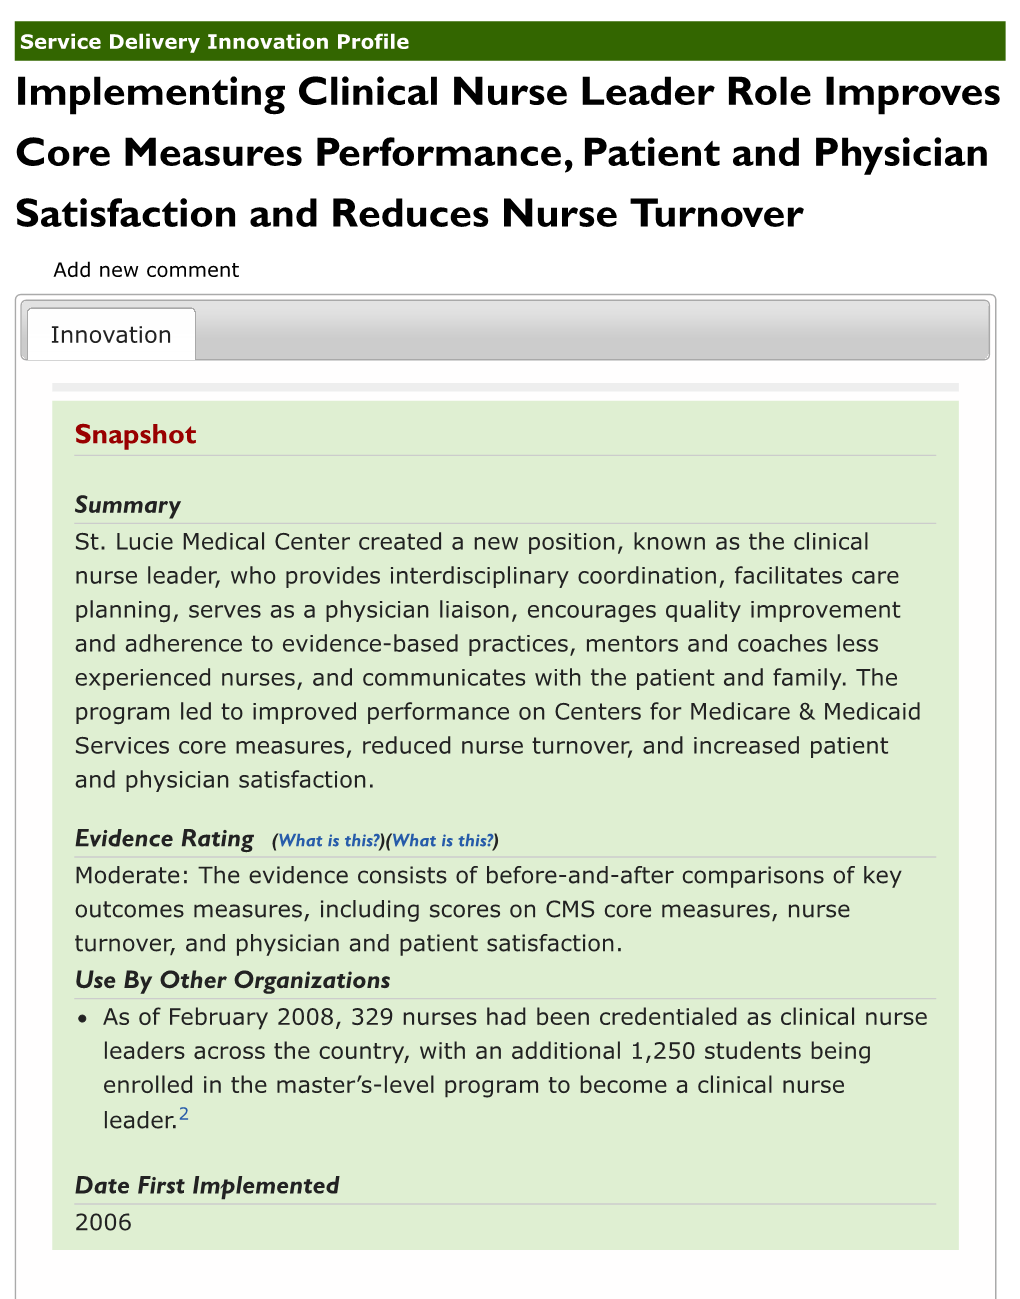 Implementing Clinical Nurse Leader Role Improves Core Measures Performance, Patient and Physician Satisfaction and Reduces Nurse Turnover